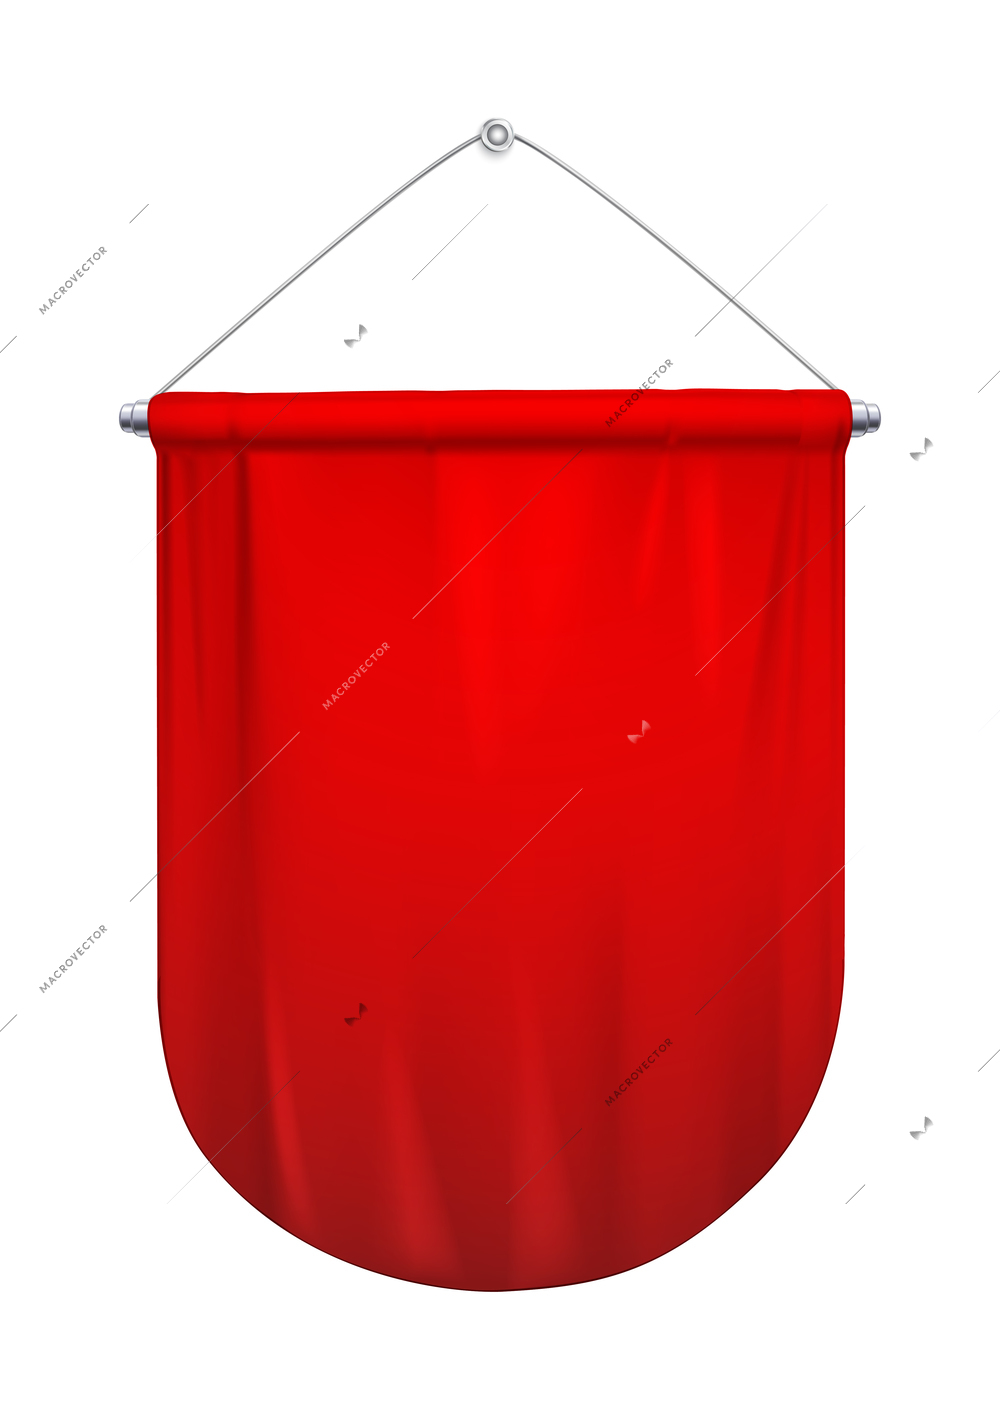 Pennants red realistic composition with isolated image of empty pennon hanging on string vector illustration